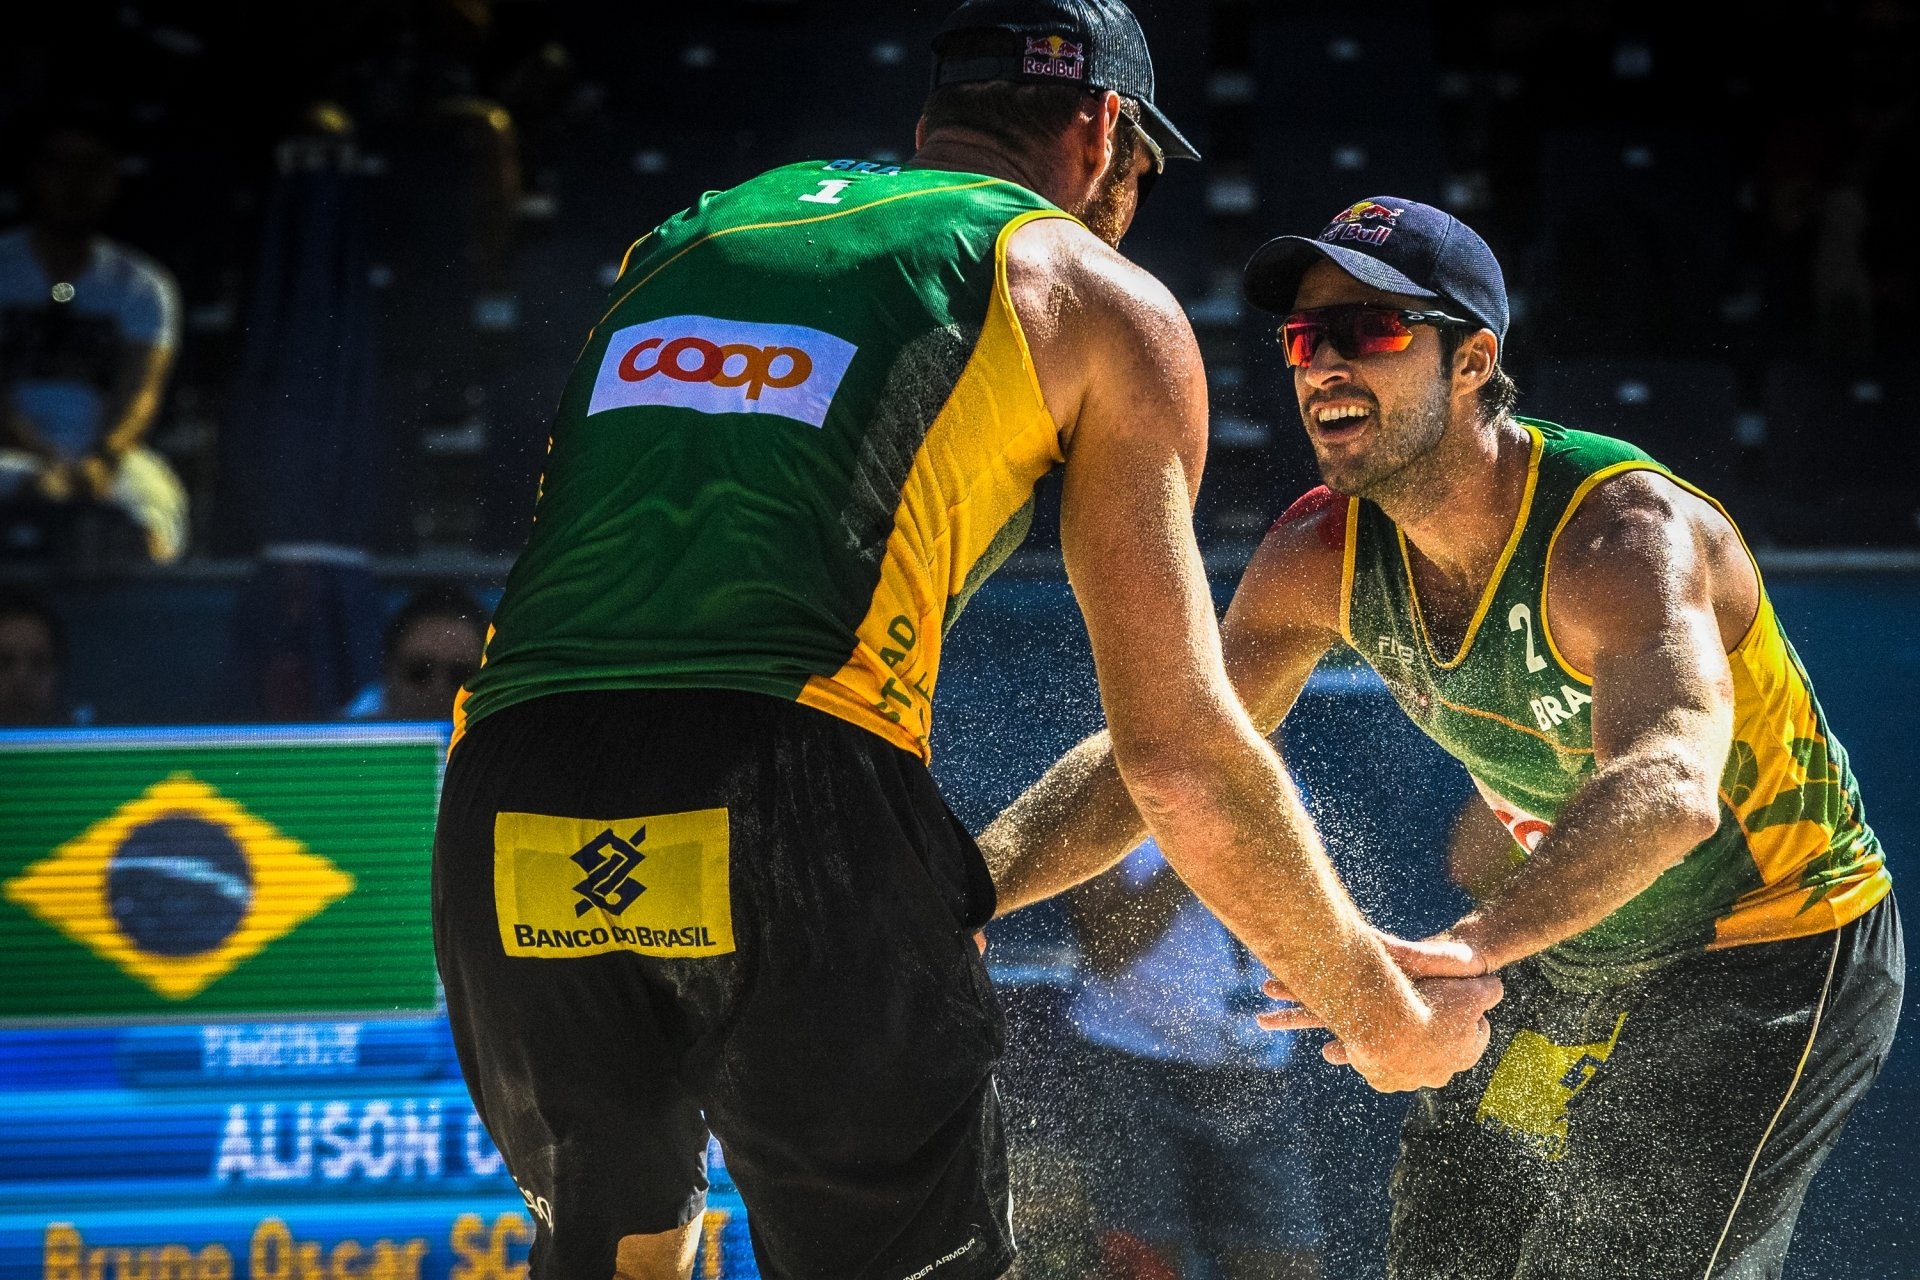 Alison (left) and Bruno Schmidt are confident they can kick-off the season with a good result in the #FTLMajor